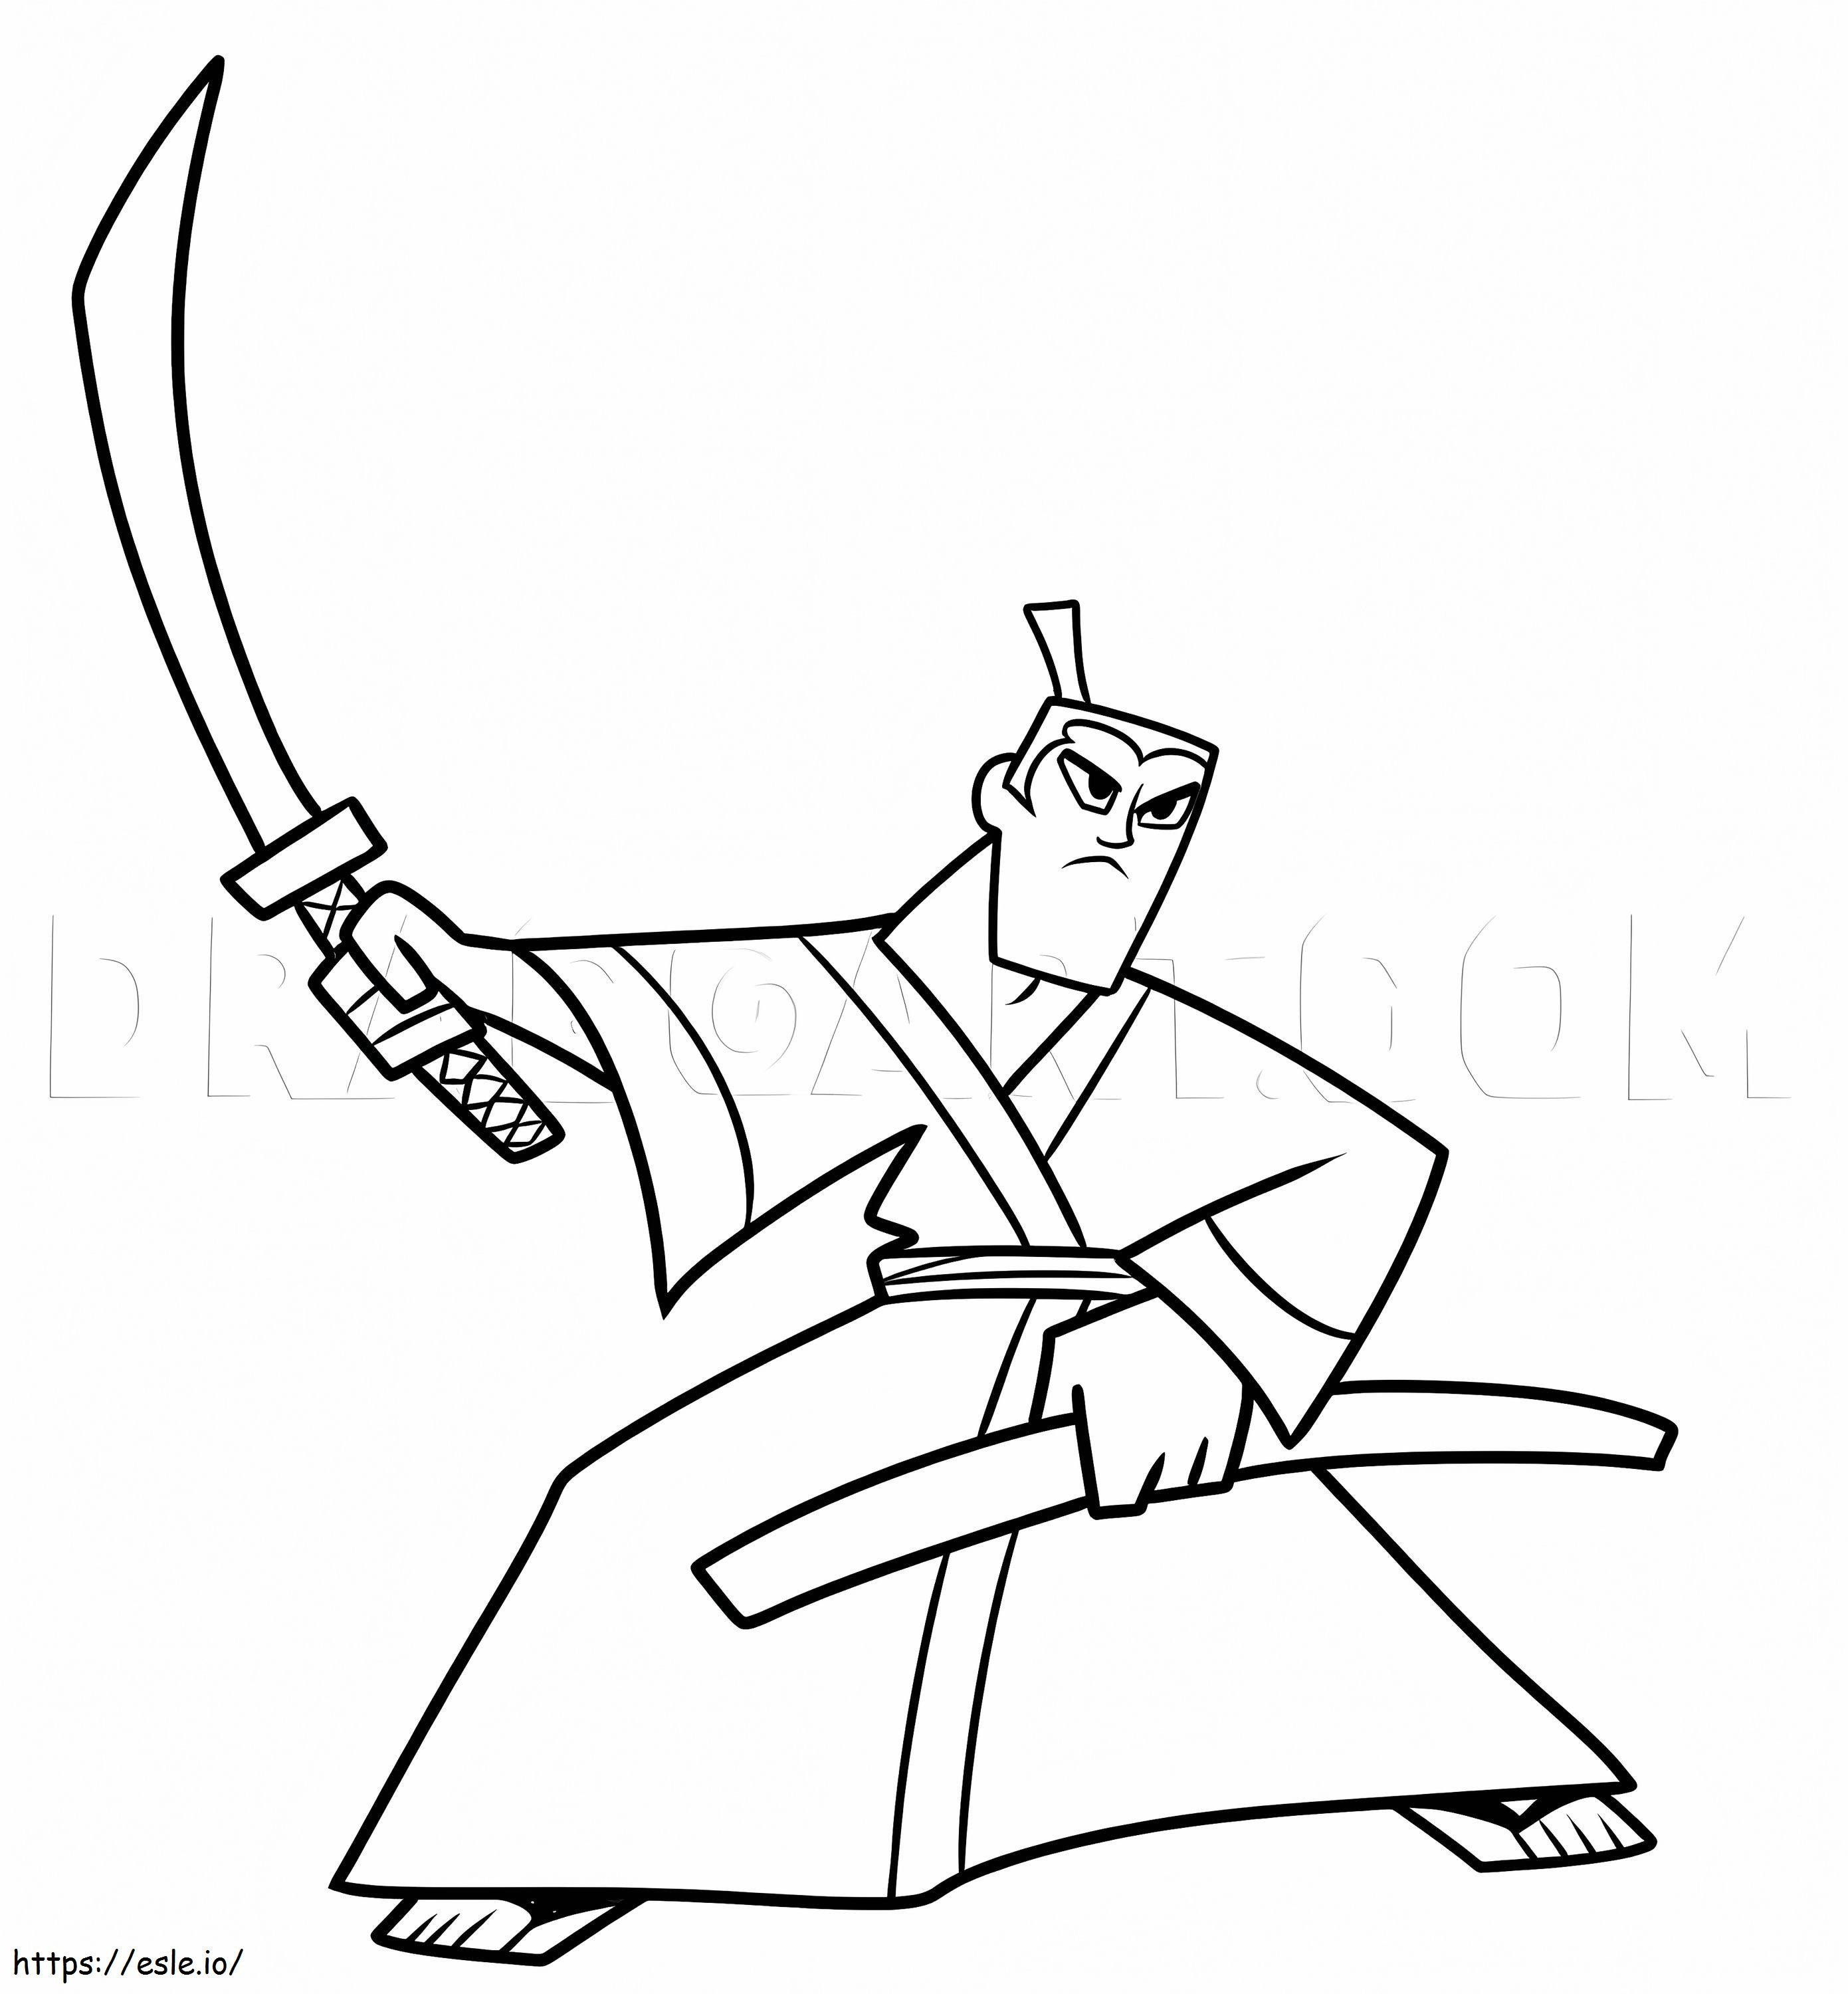 Awesome Samurai Jack coloring page